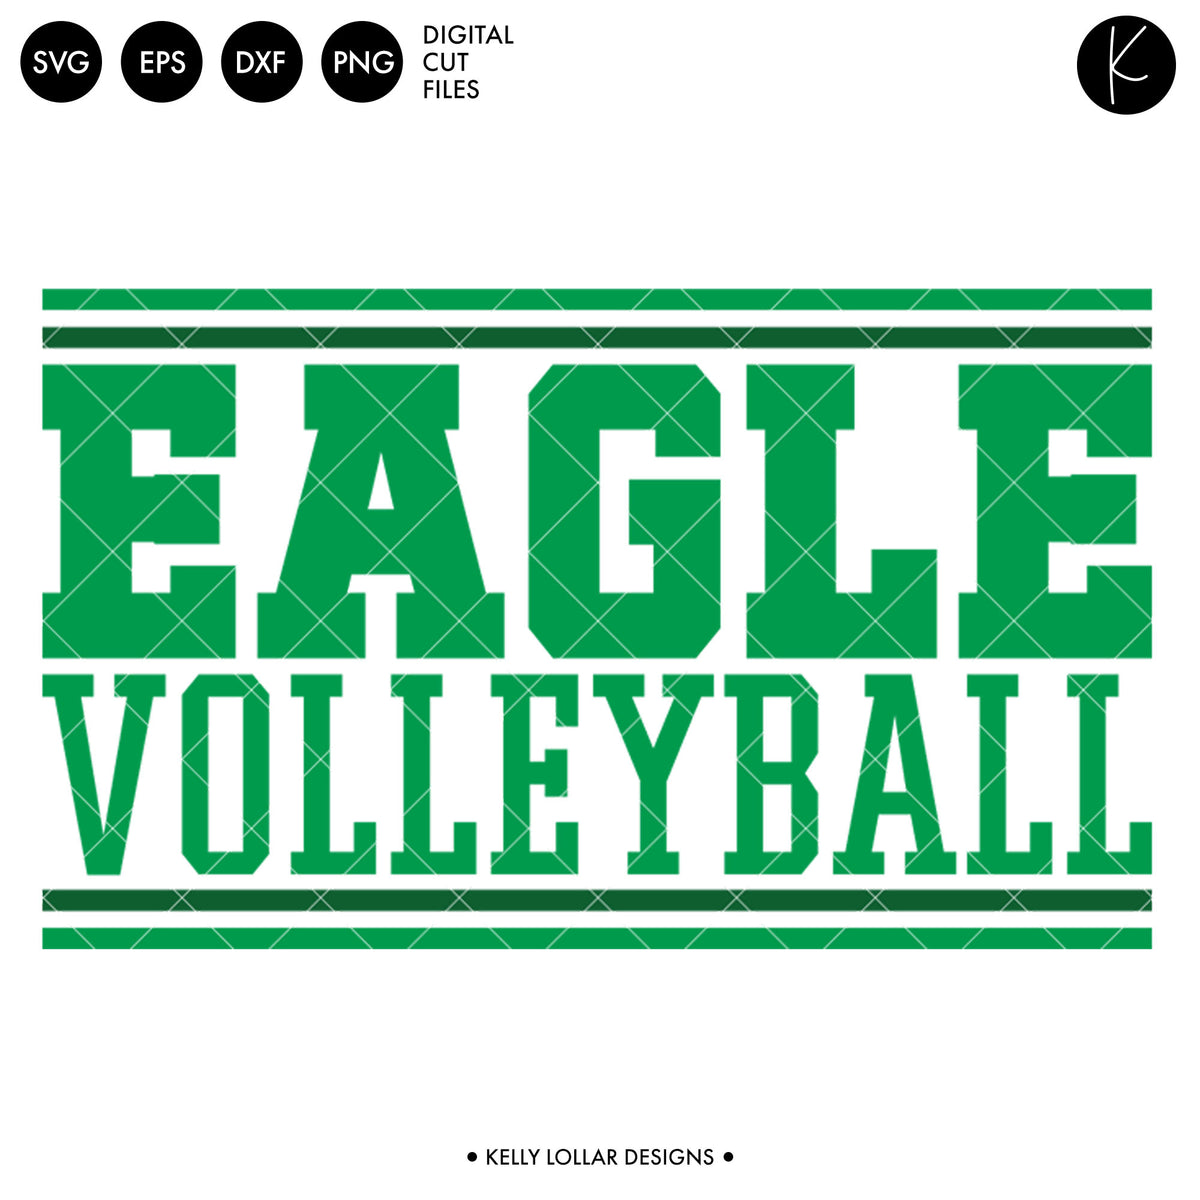 Eagles Volleyball Bundle | SVG DXF EPS PNG Cut Files